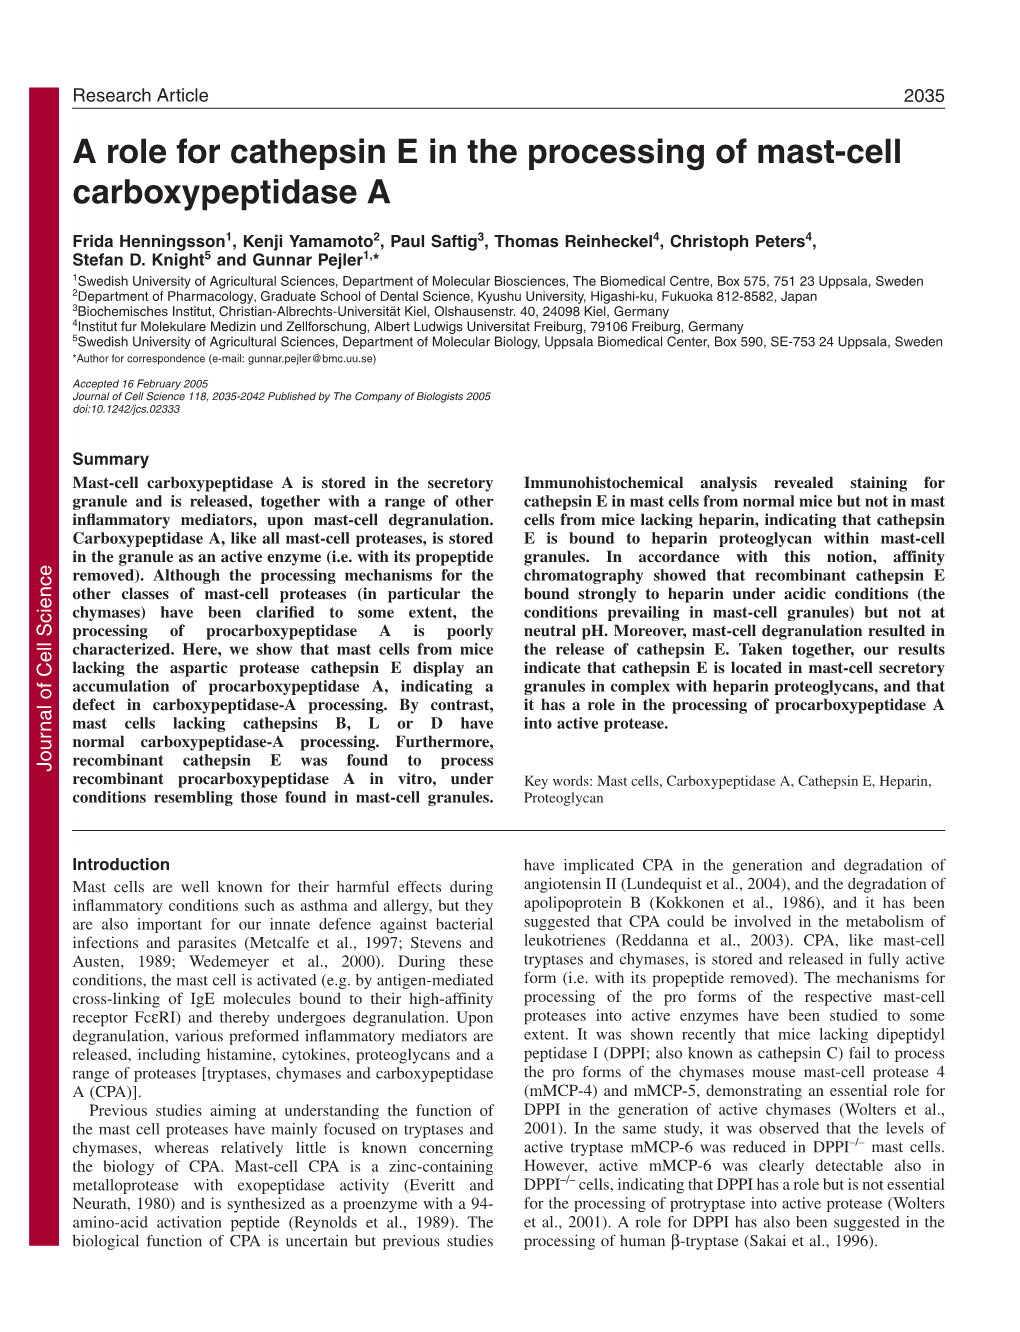 A Role for Cathepsin E in the Processing of Mast-Cell Carboxypeptidase A